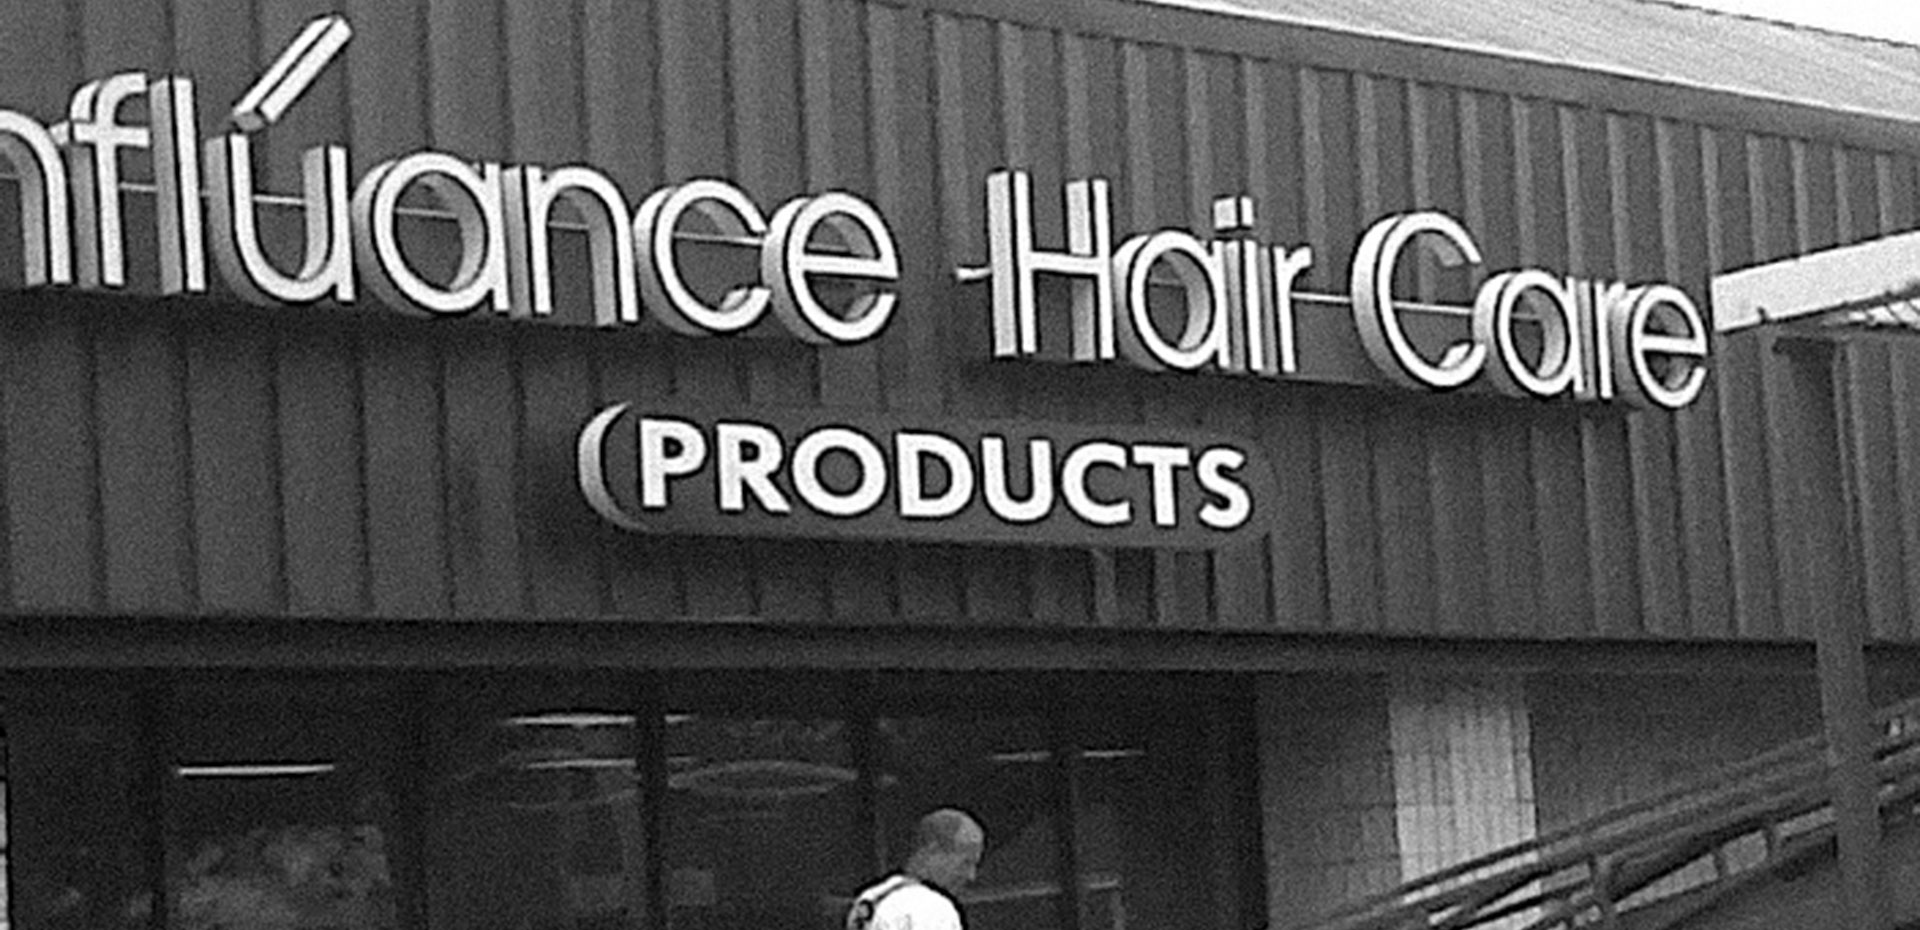 Influance Hair Care Building Sign